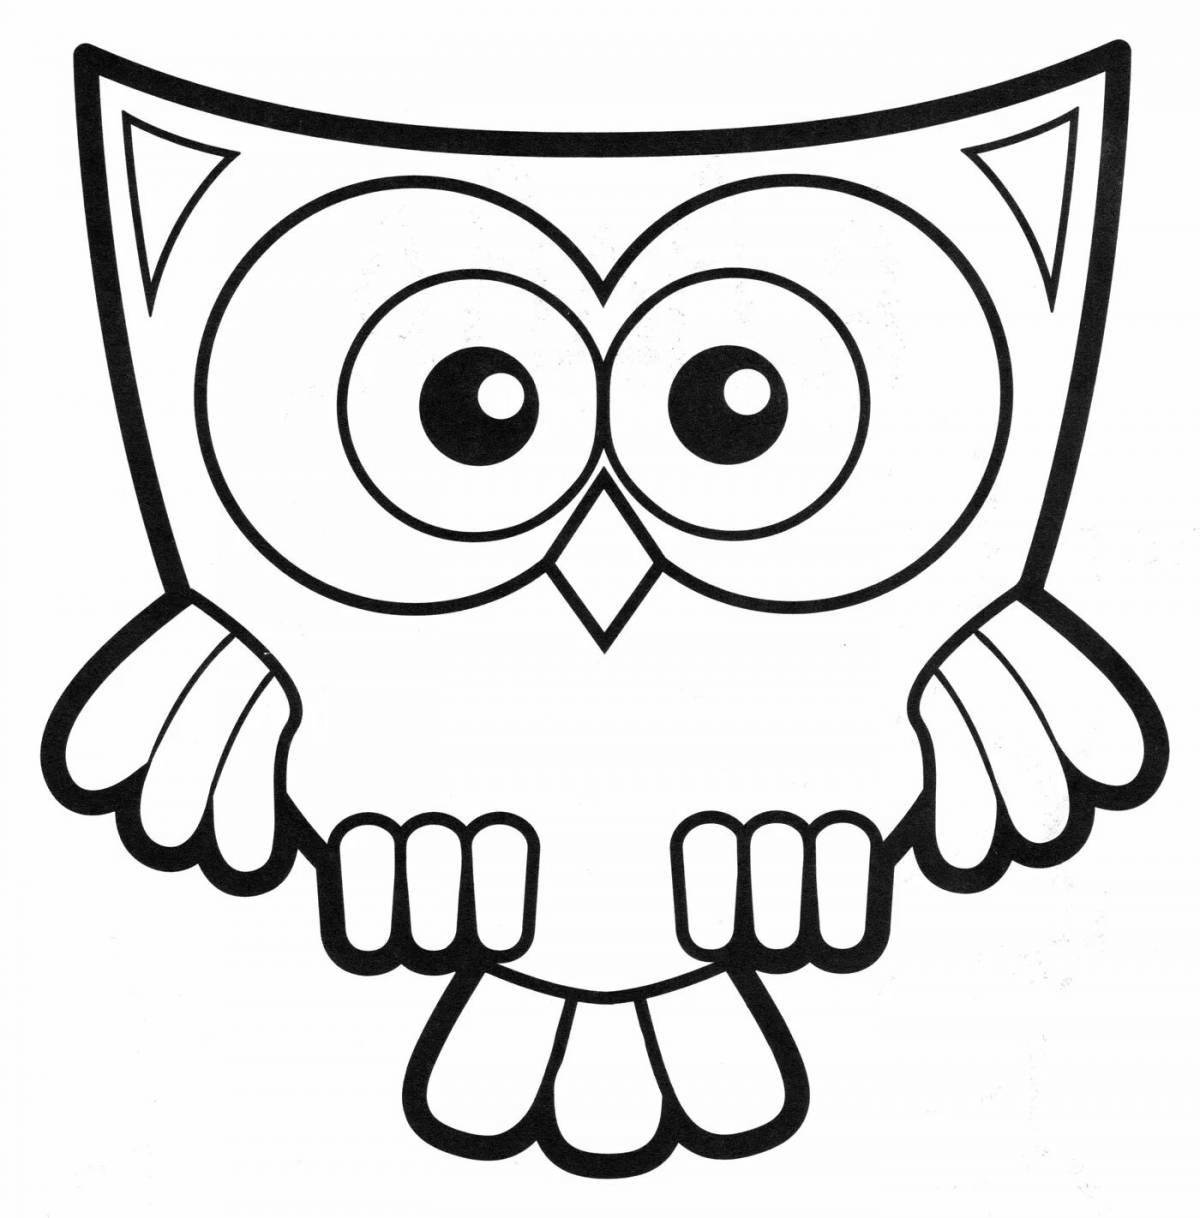 Exotic owl coloring book for kids